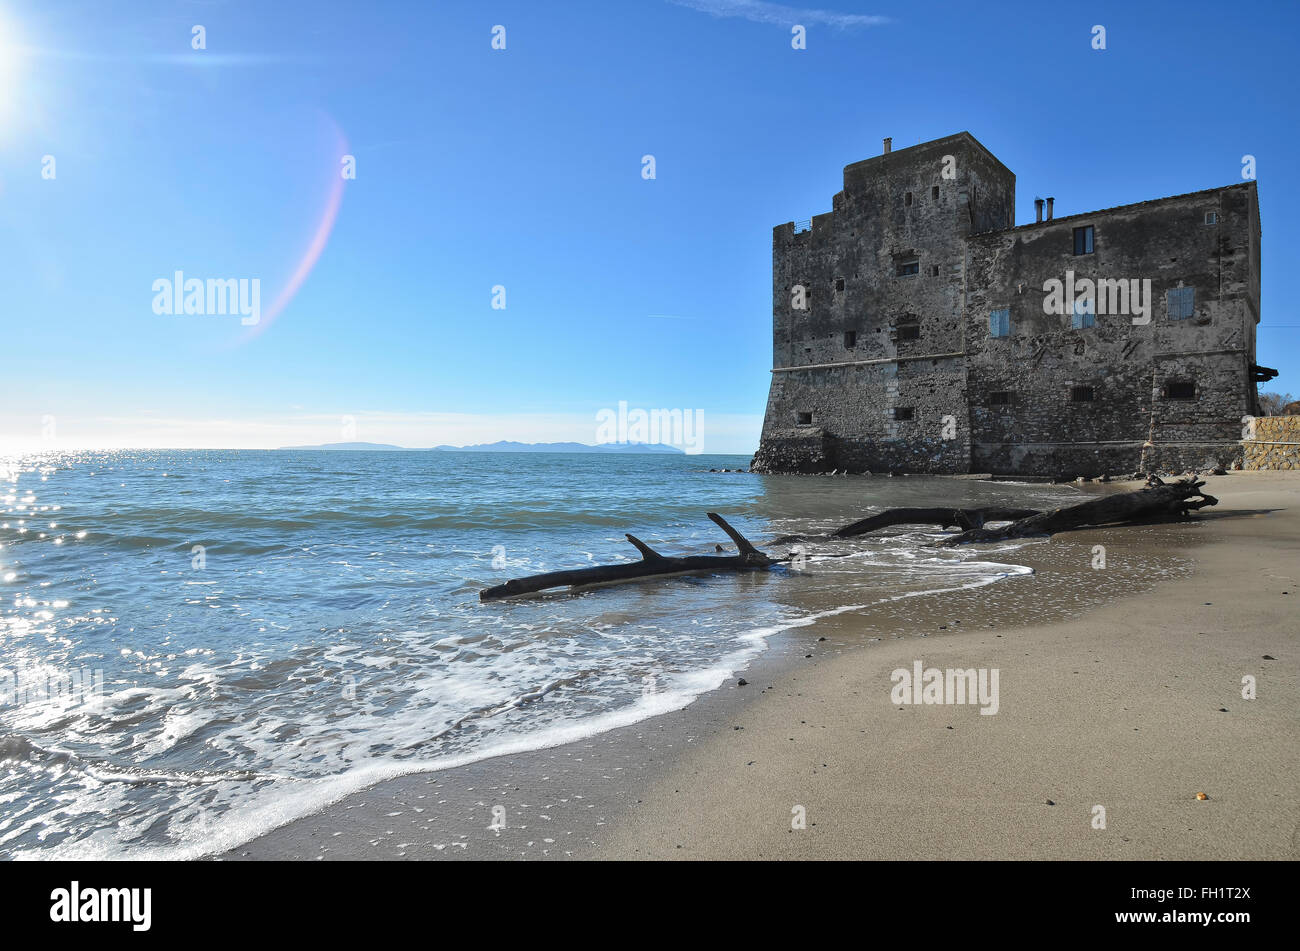 View of the beach of Torre mozza Stock Photo